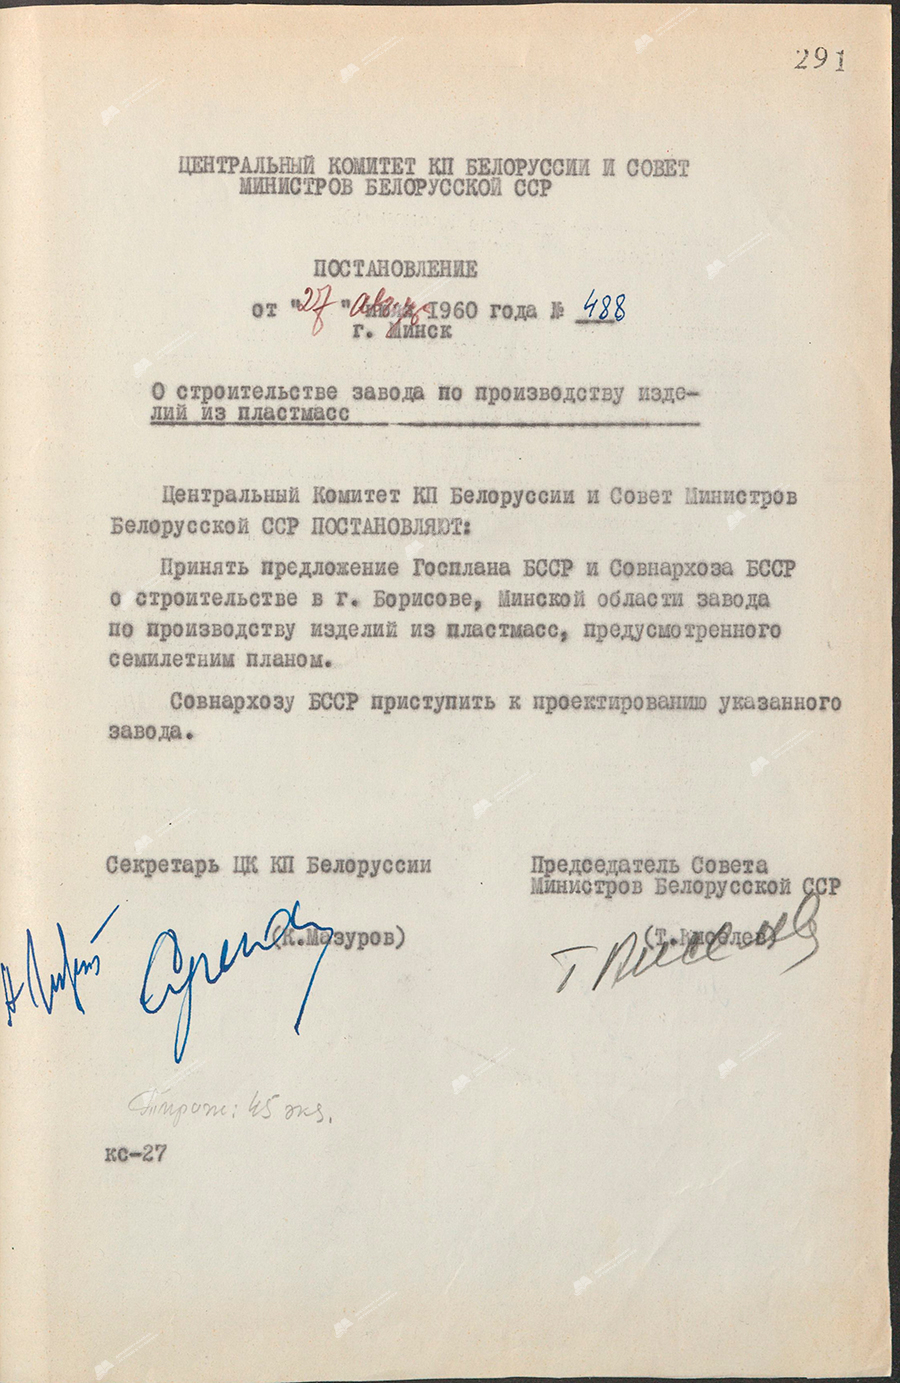 Resolution No. 488 of the Central Committee of the Communist Party of Belarus and the Council of Ministers of the BSSR «On the construction of a plant for the production of plastic products»-с. 0